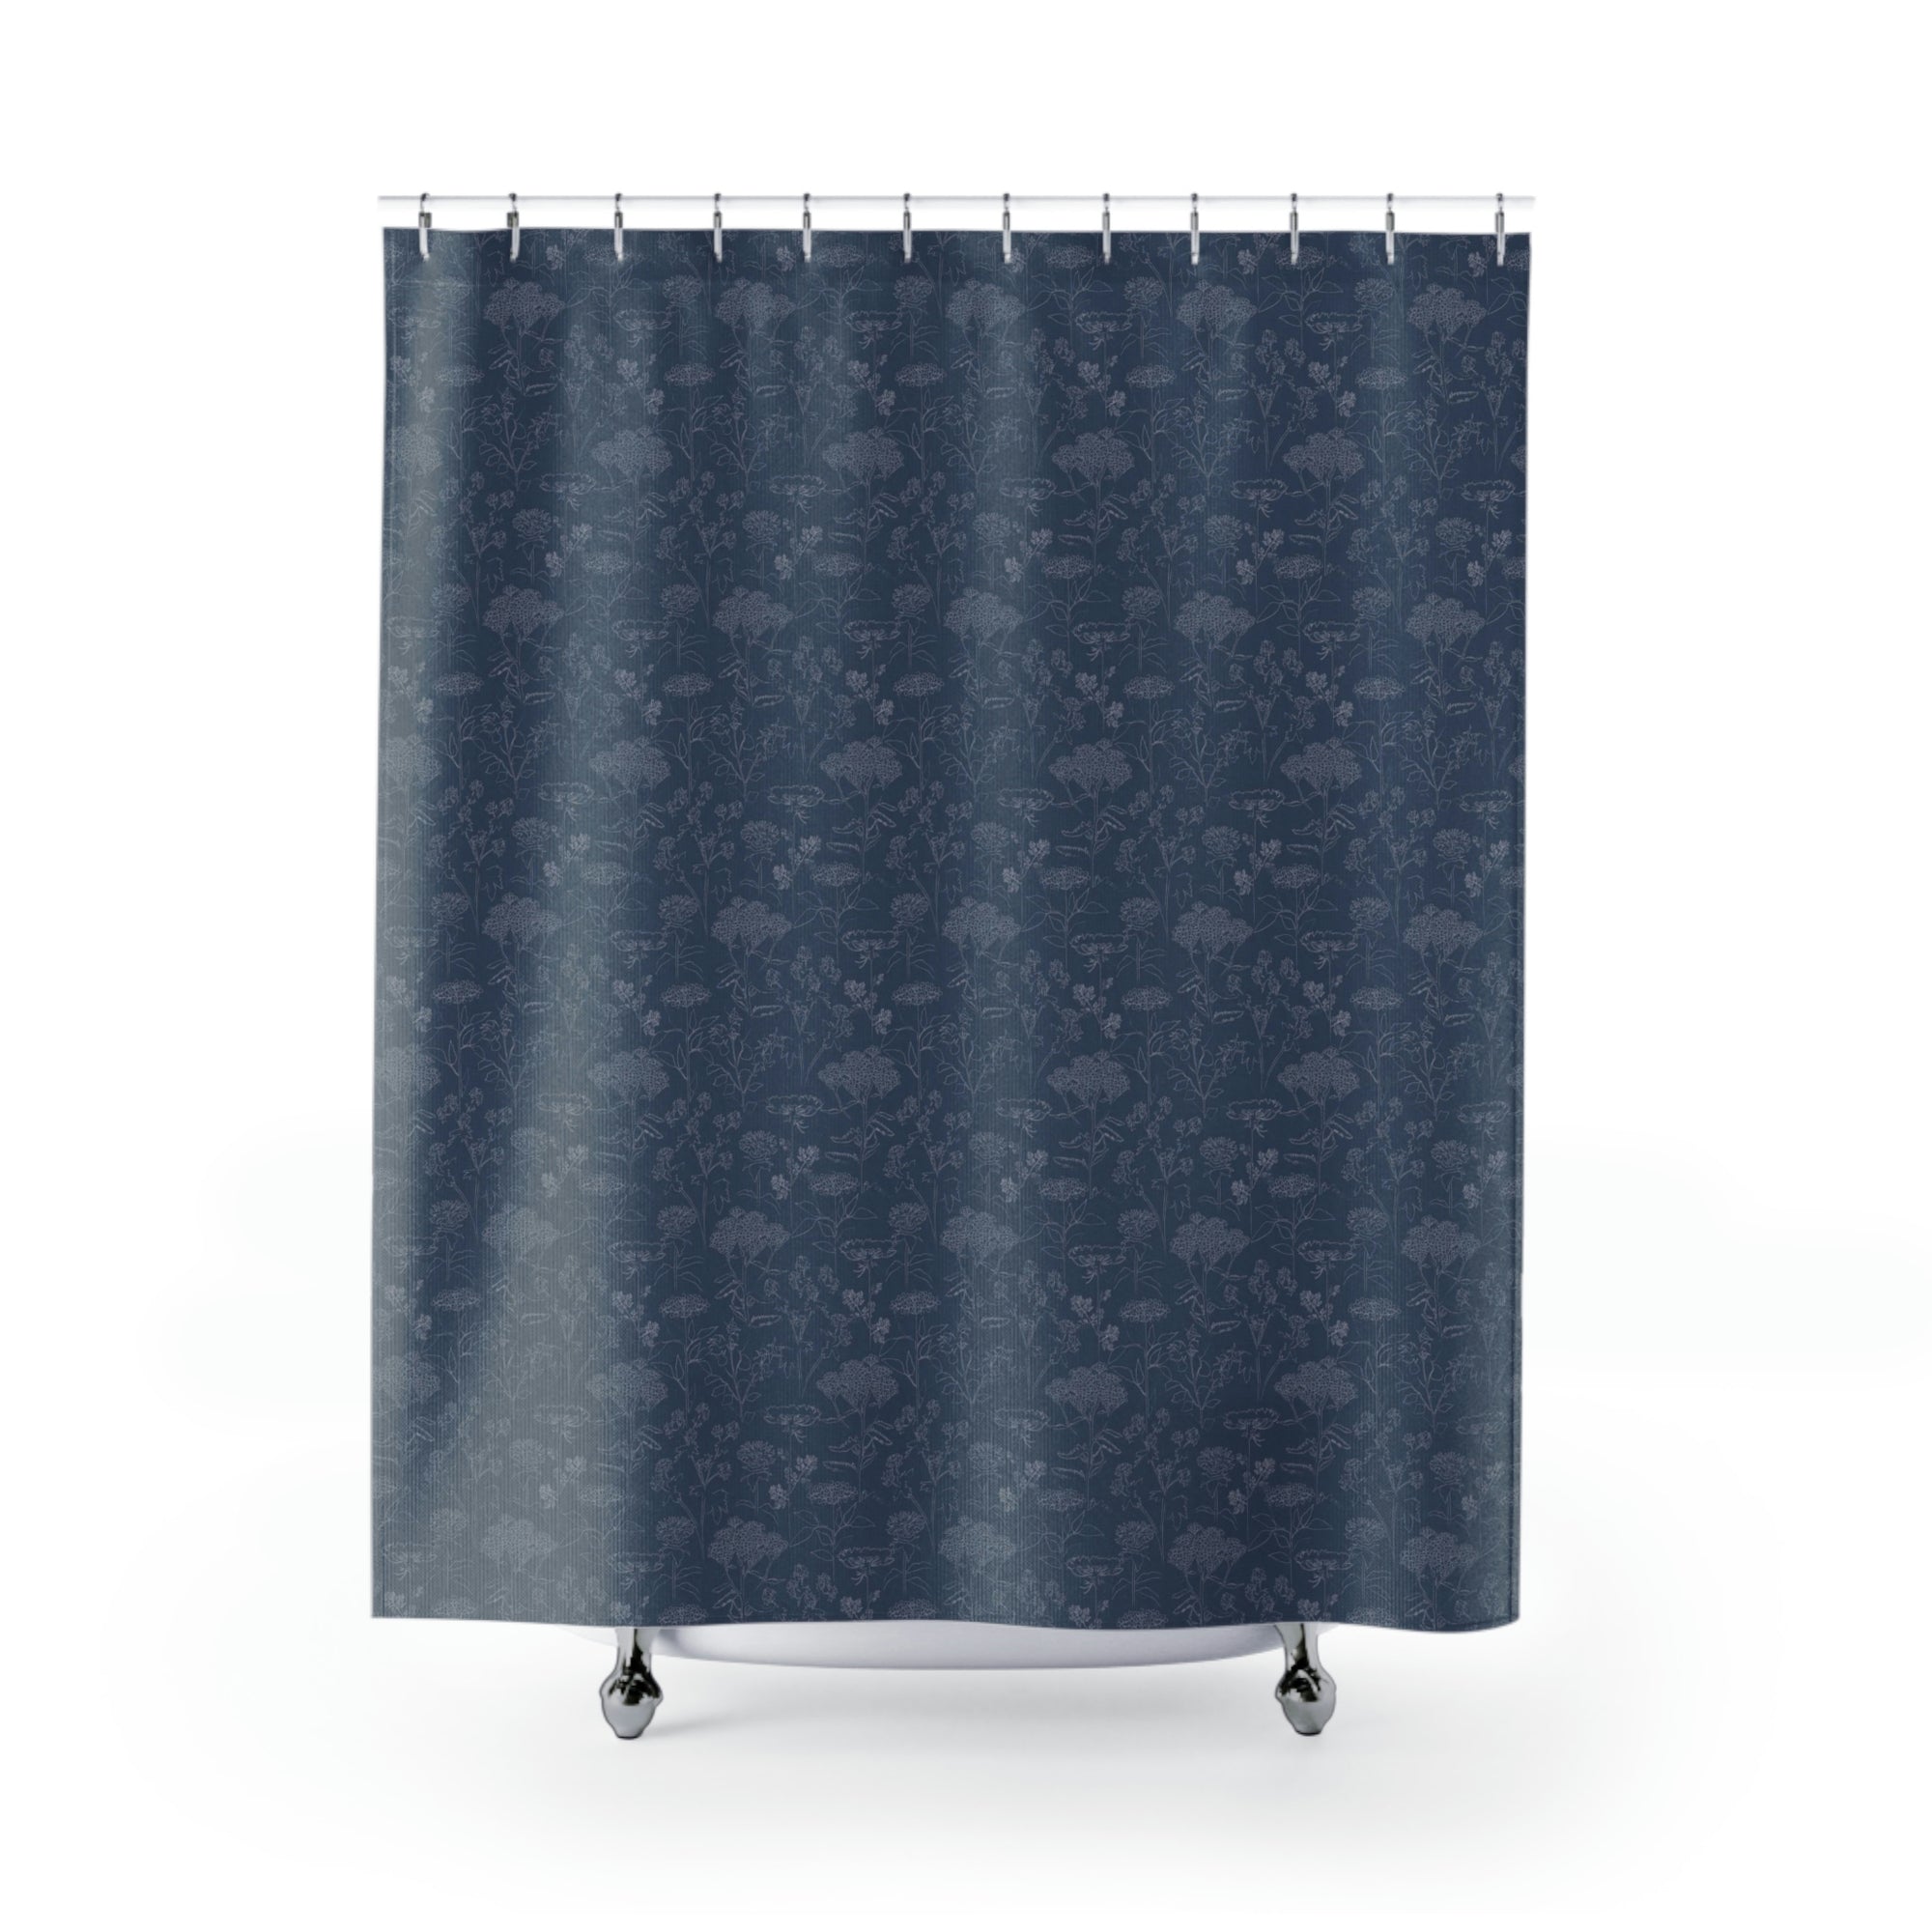 Swallowtail Shower Curtain in Navy